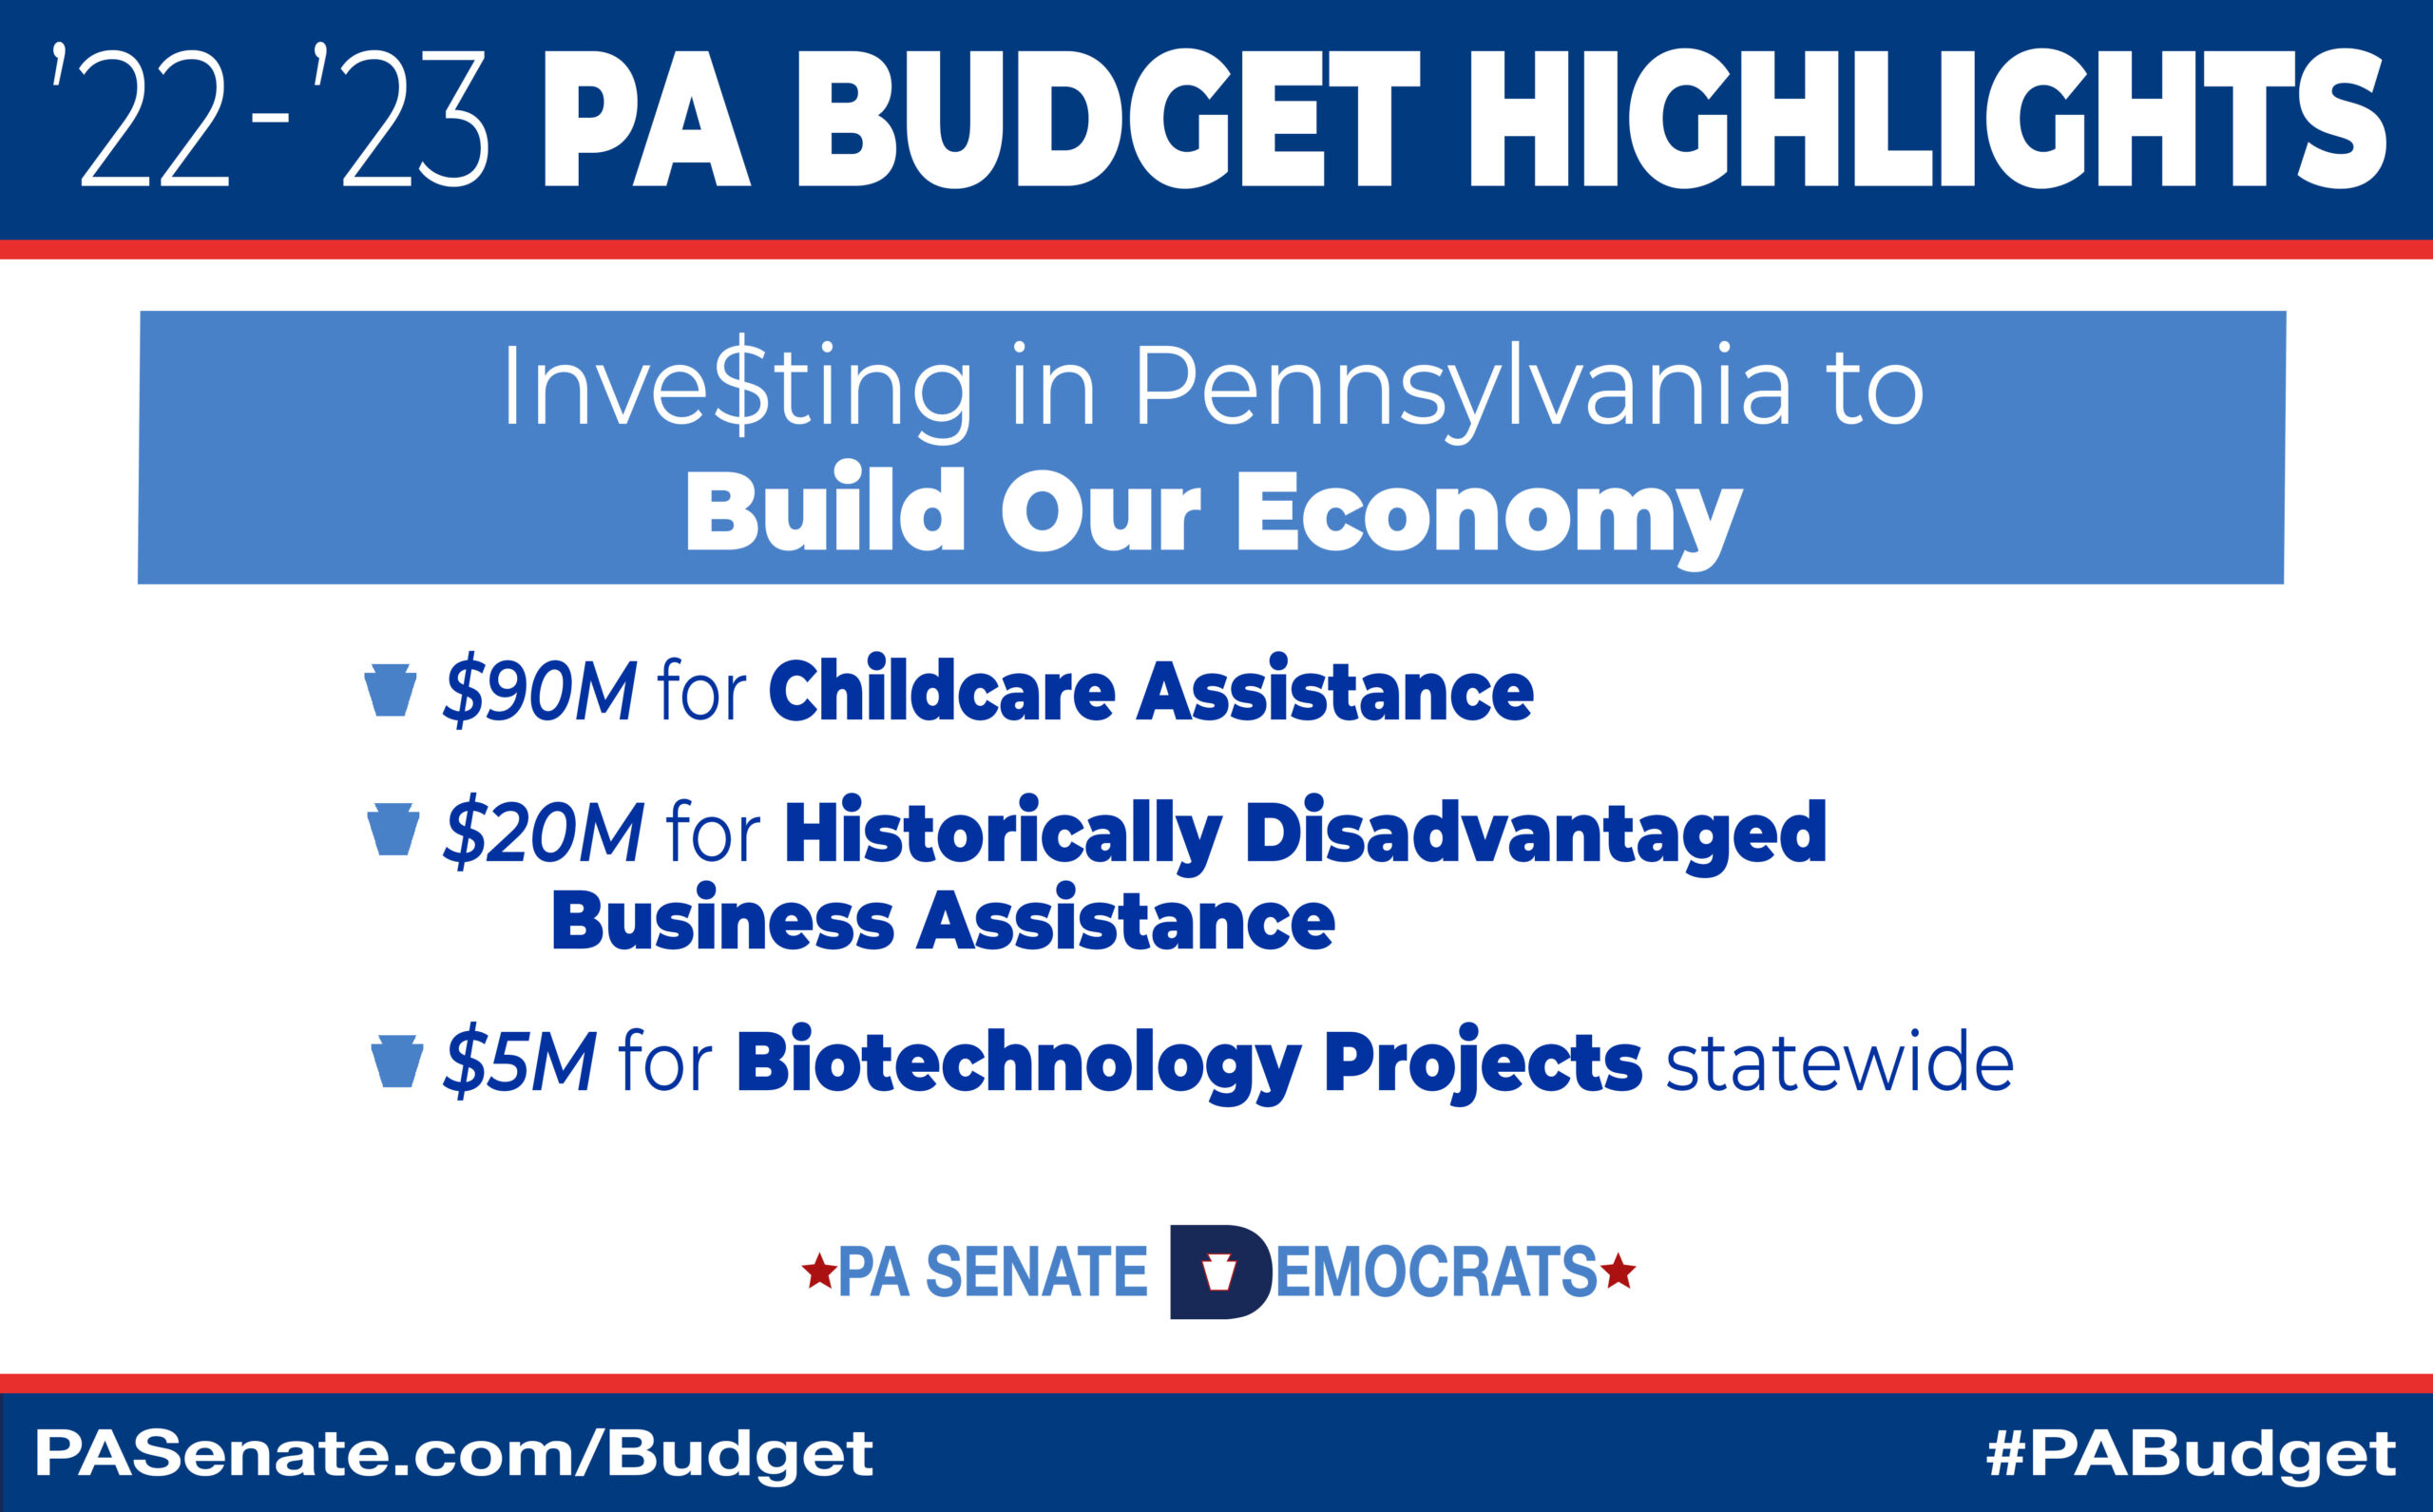 Investing in PA to Build our Economy